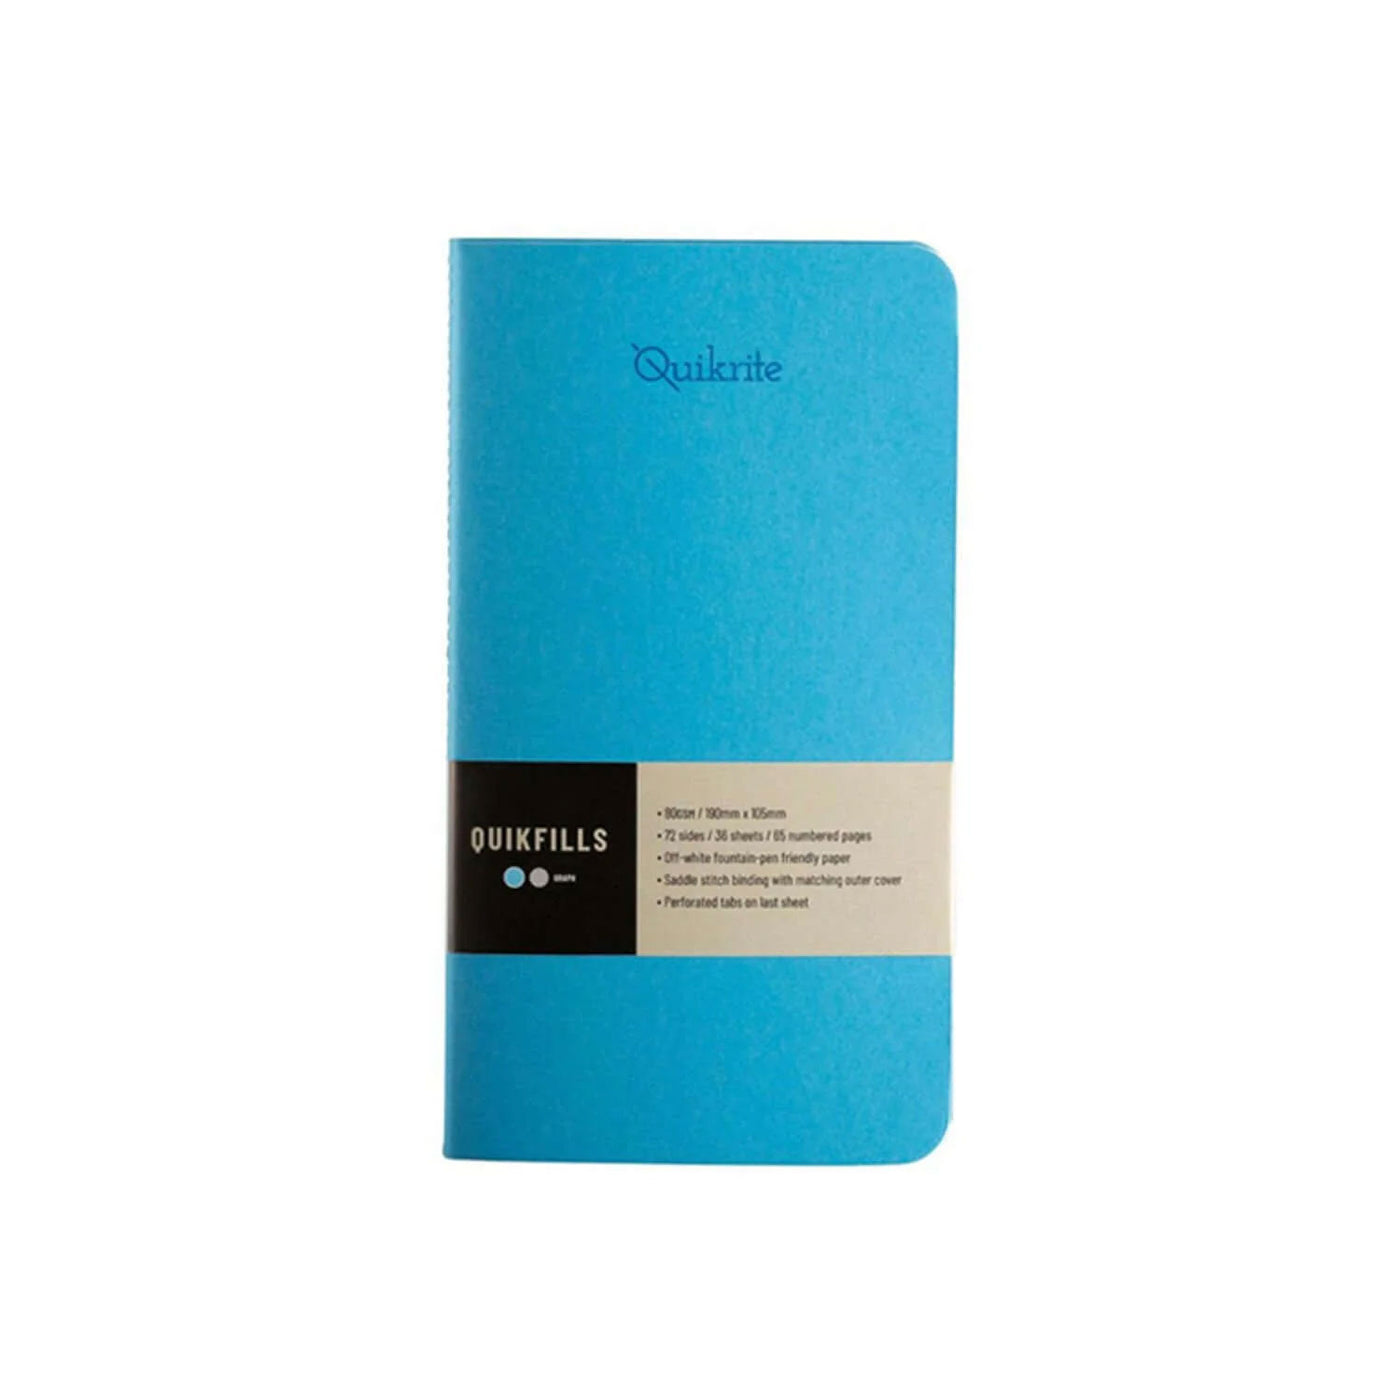 Pennline Quikfill Notebook Refill For Quikrite, Turquoise - Set Of 2 1